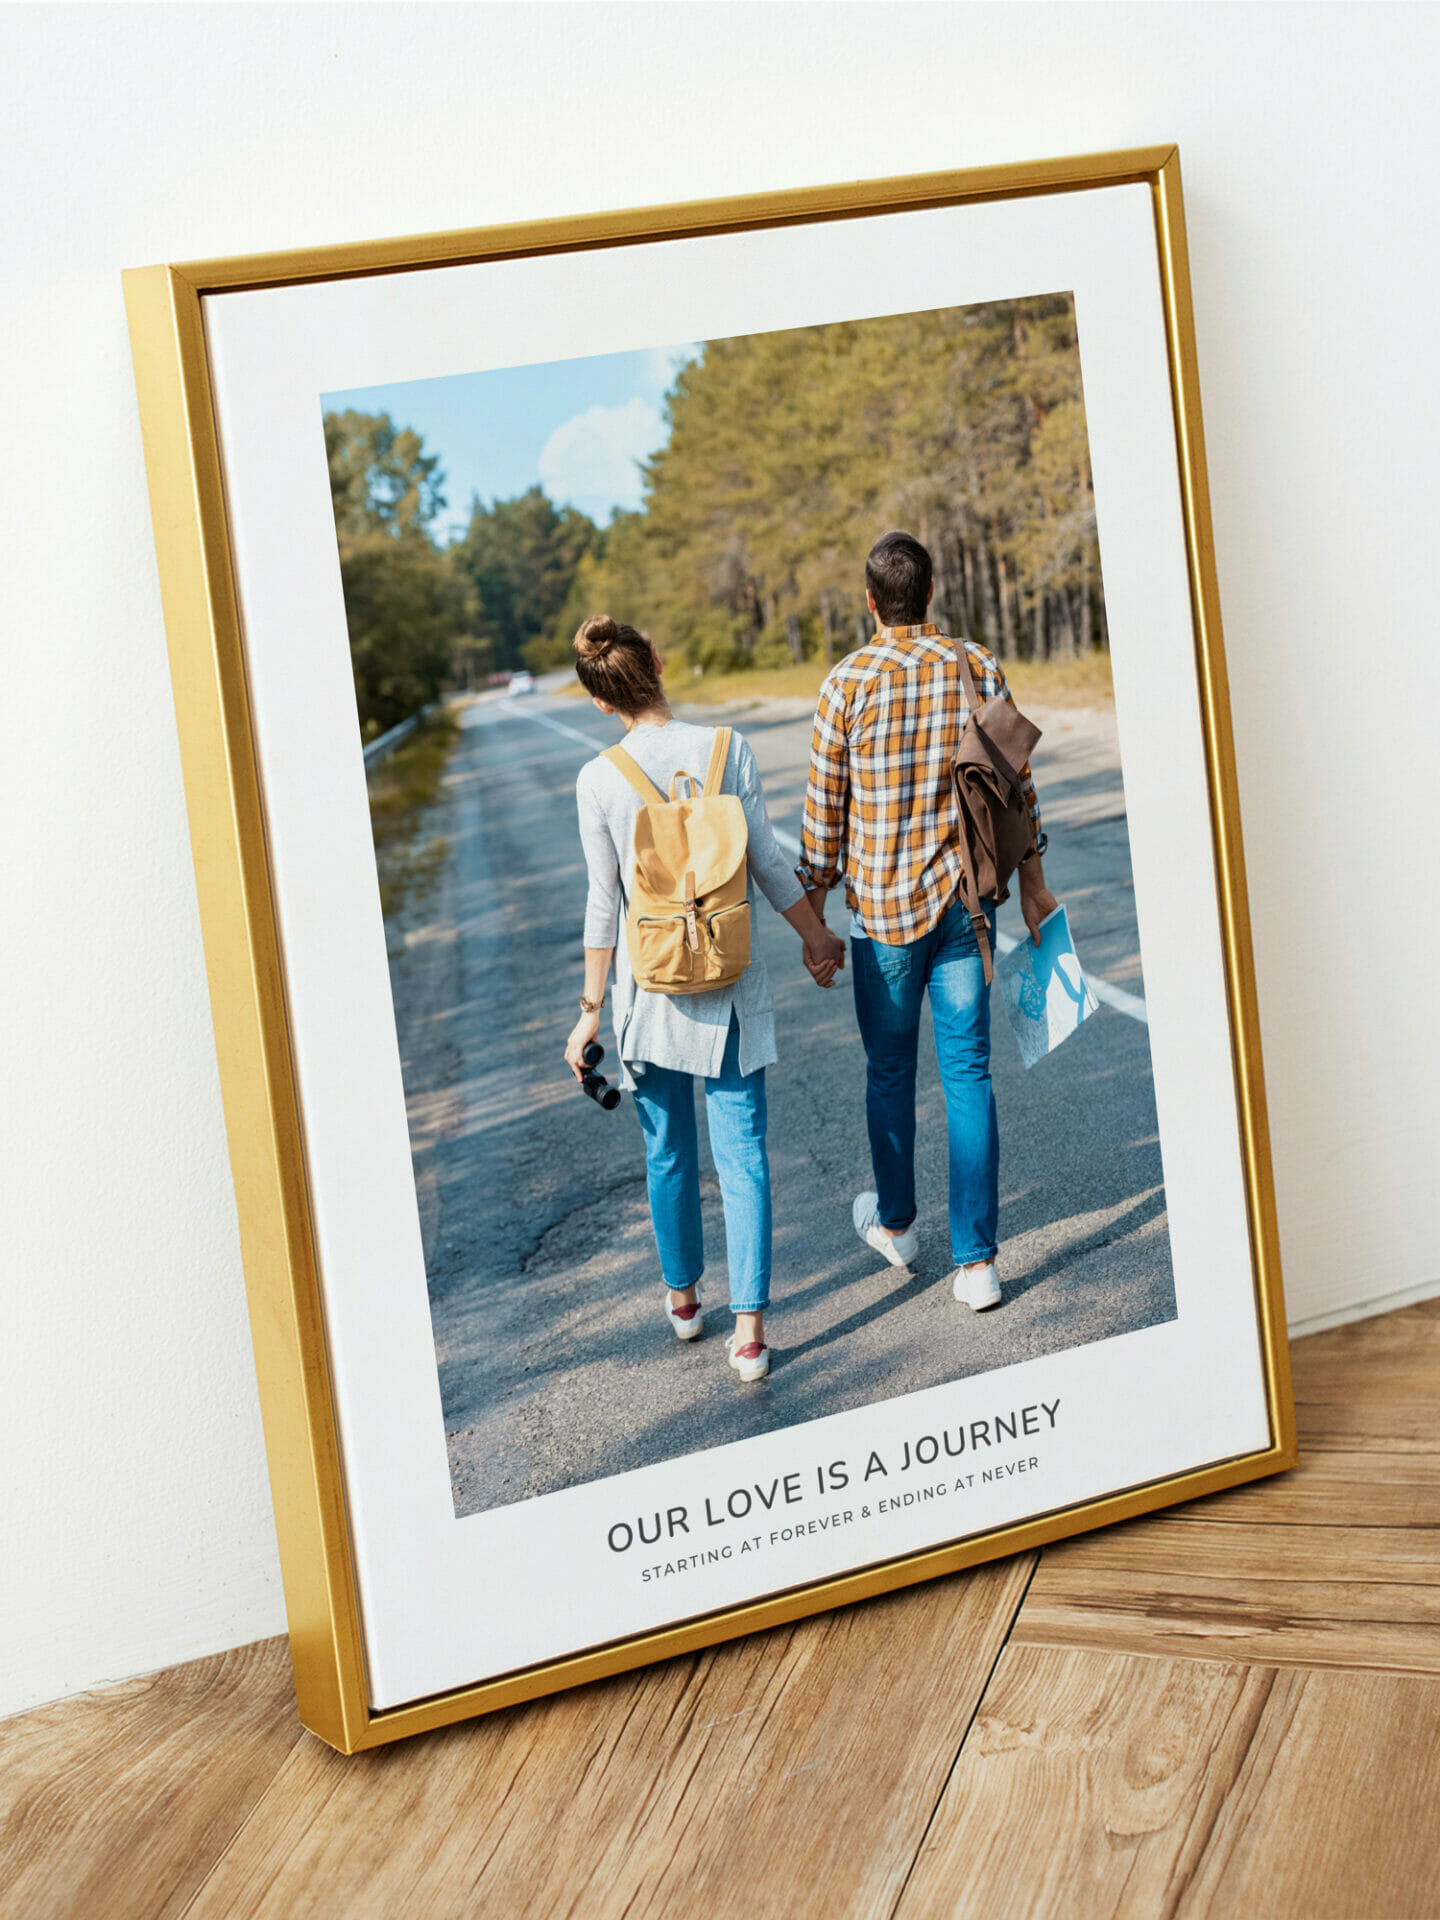 Interior with poster of couple walking down a road together